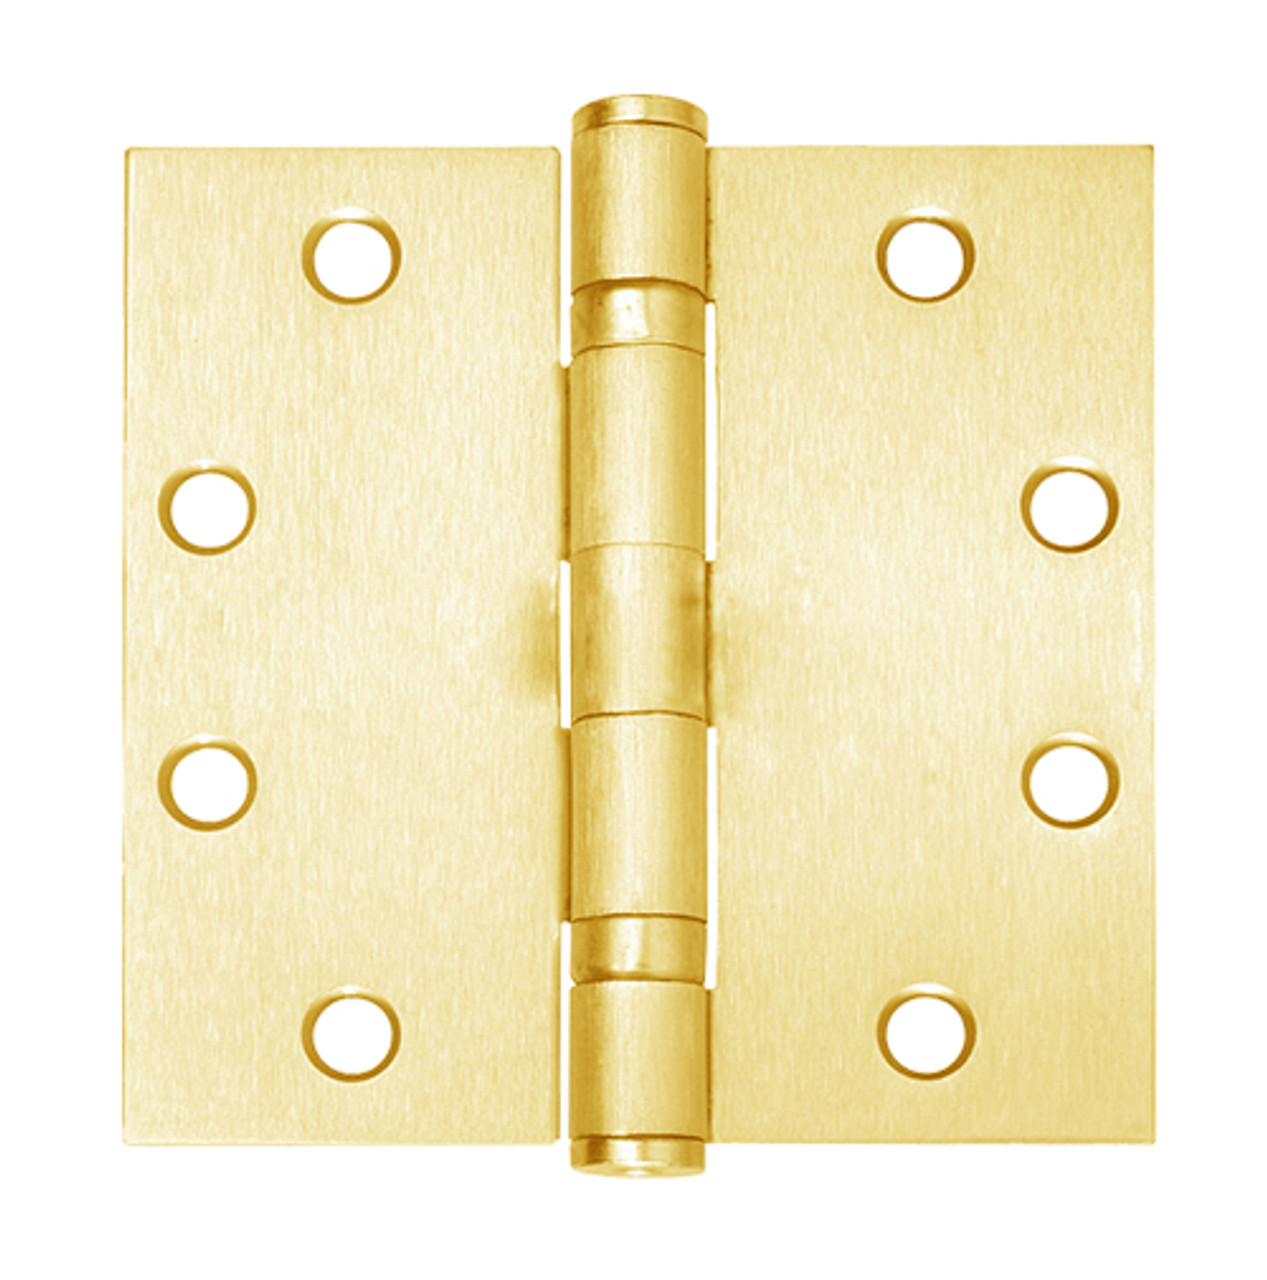 5BB1-5x4-5-605-TW4 IVES 5 Knuckle Ball Bearing Full Mortise Hinge with Electric Thru-Wire in Bright Brass